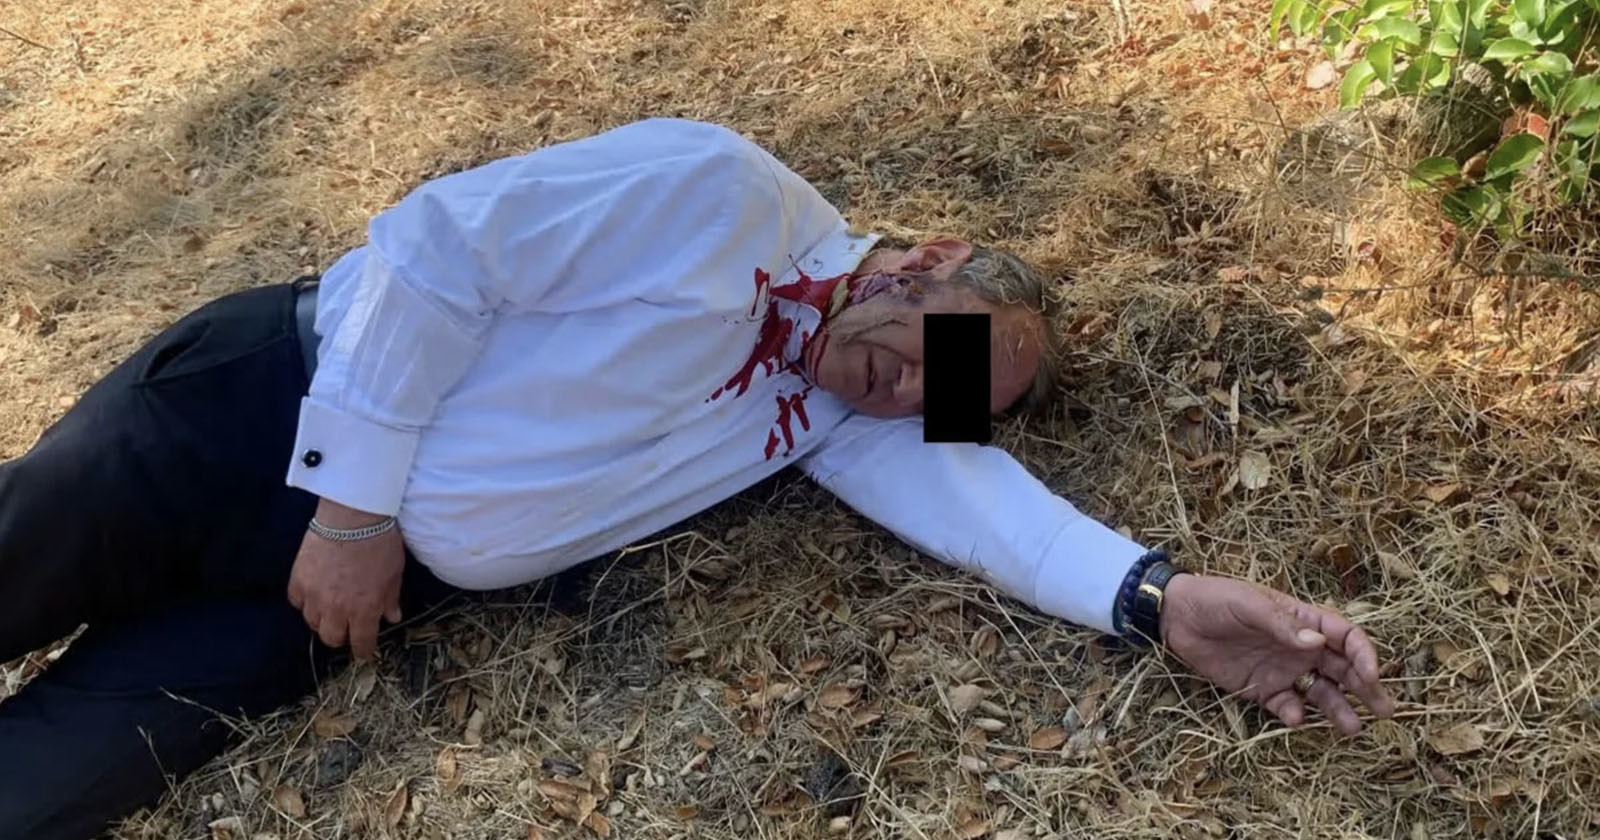  federal agents staged fake murder photo stop assassination 